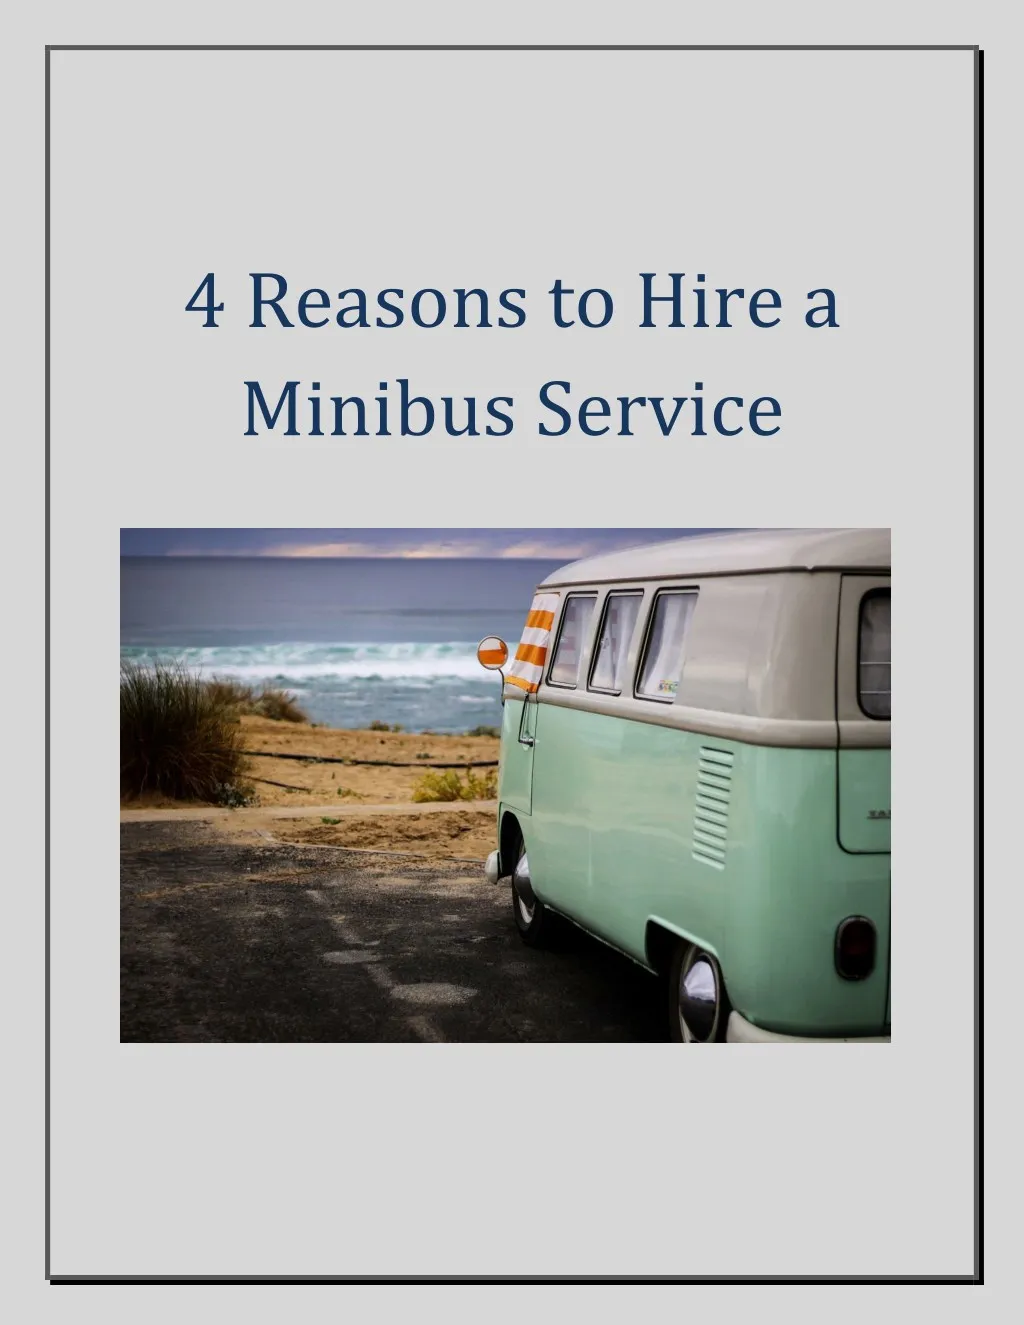 4 reasons to hire a minibus service